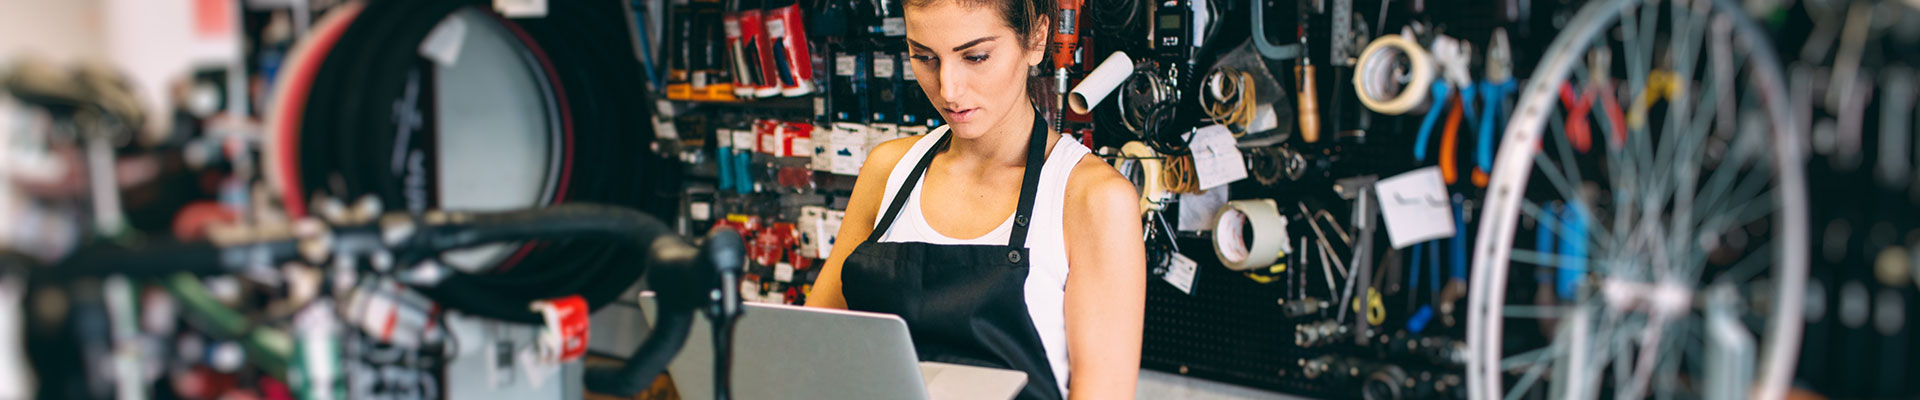 A young woman works in a bicycle repair shop at a laptop.